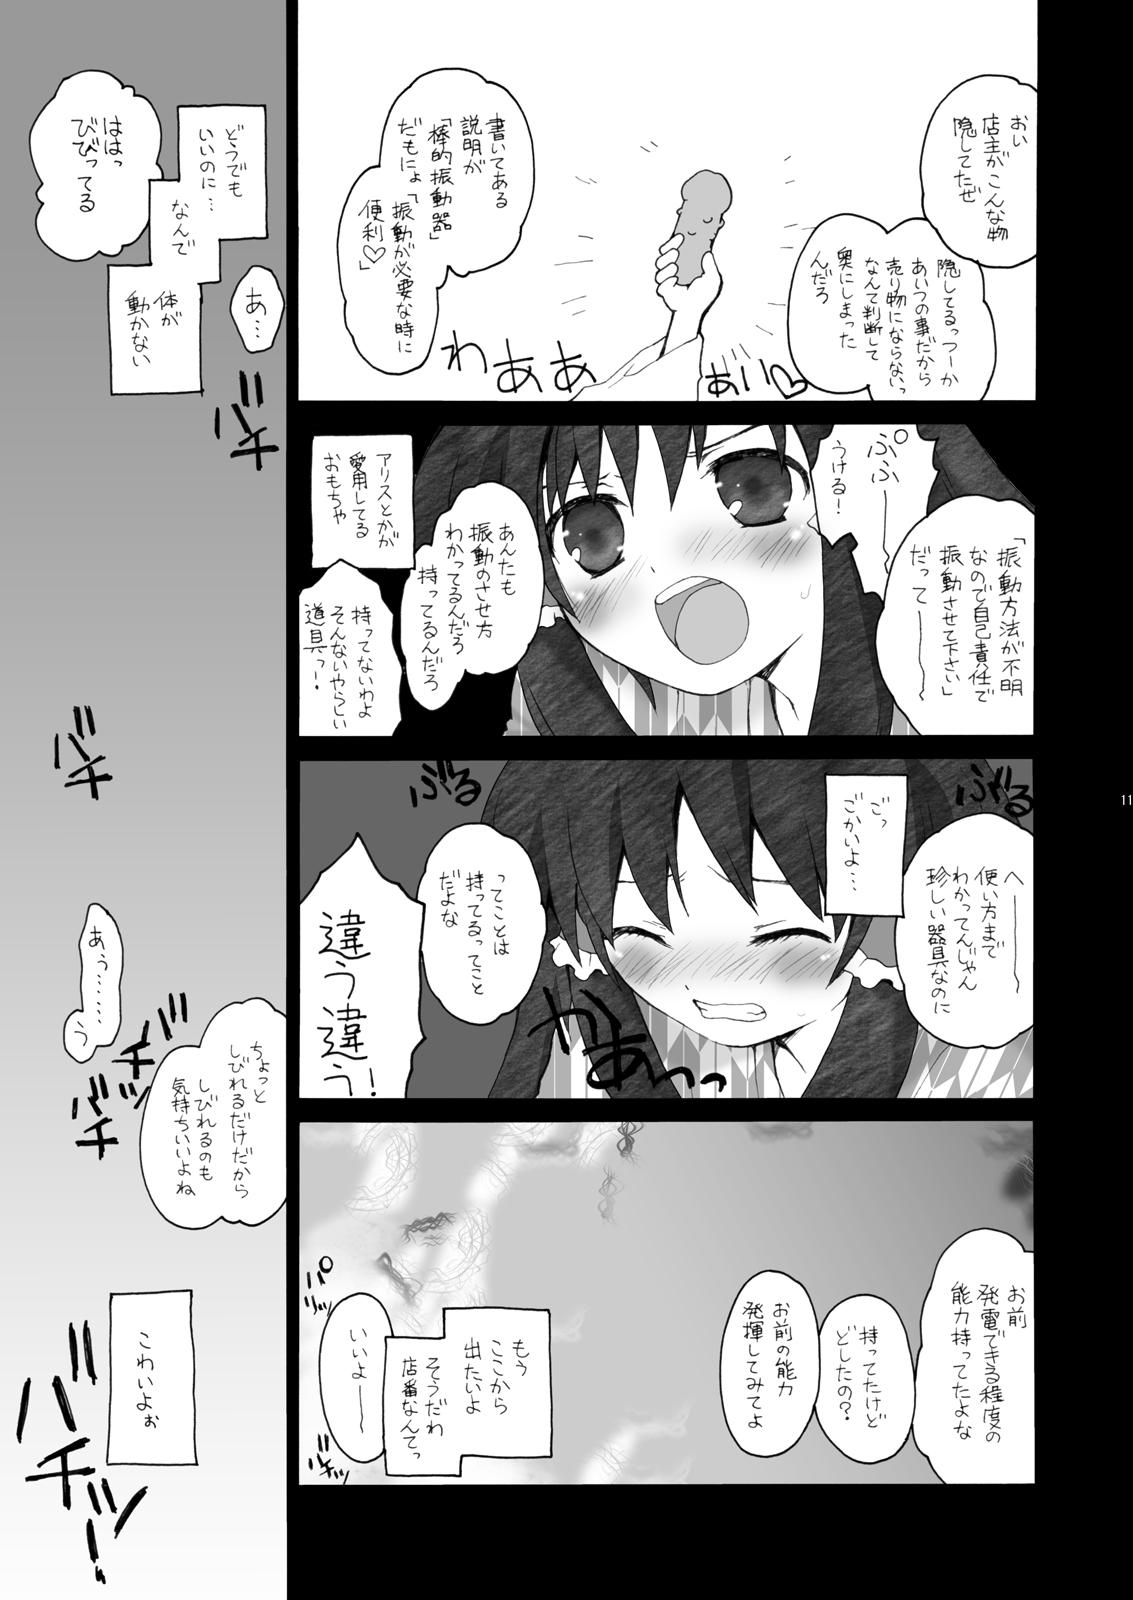 Fun けしからん娘達～あるお店の一日総集編～ - Touhou project Taboo - Page 9